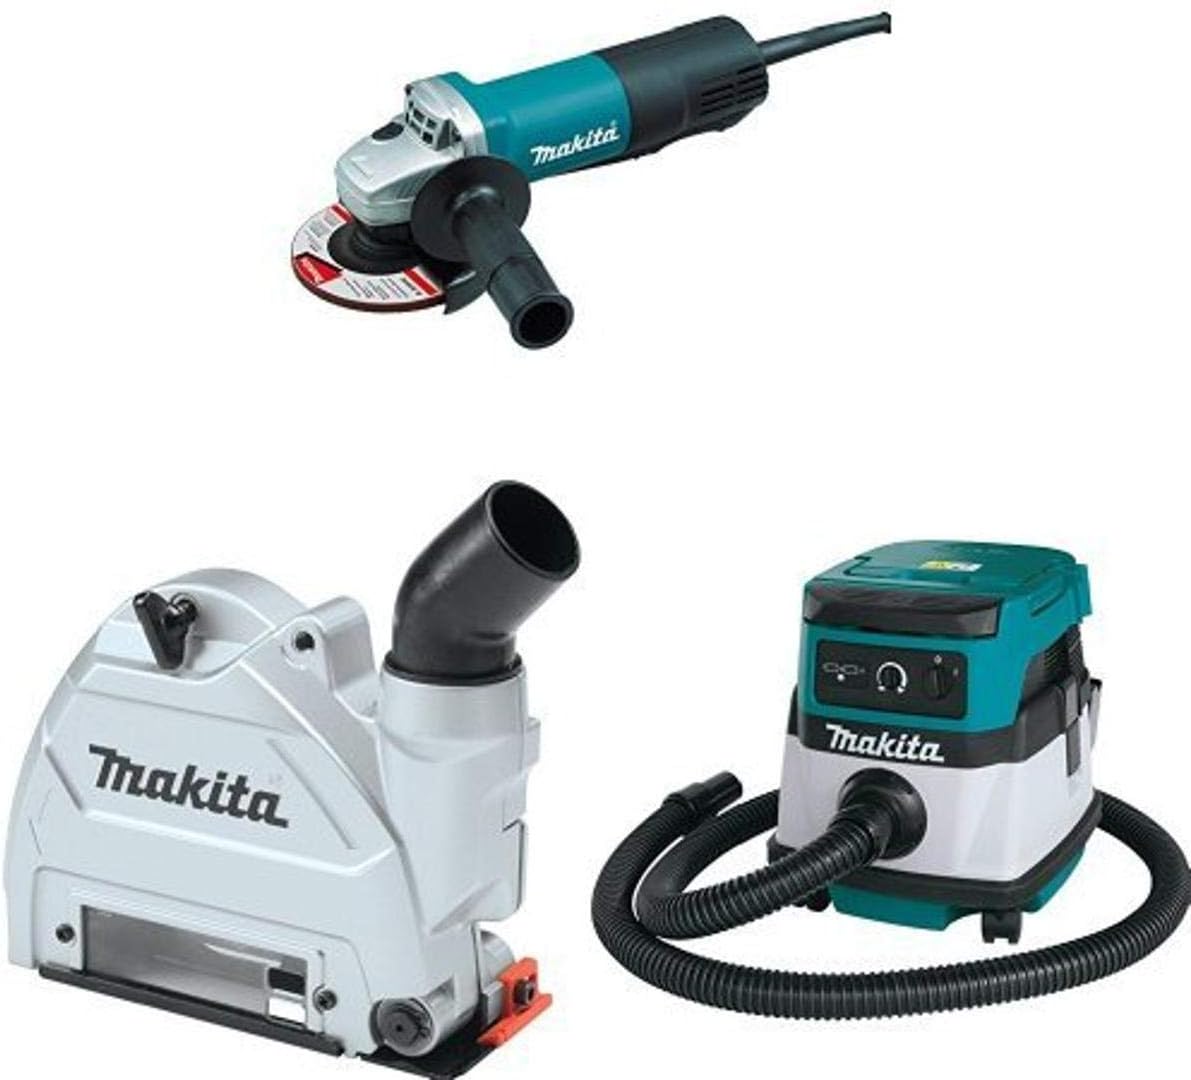 Makita 9557PB 4-1/2-Inch Paddle Switch Angle Grinder, with AC/DC Switch, 196846-1 Dust Extraction Tuck Point Guard,  XCV04Z 18V X2 LXT (36V) 2.1 Gallon HEPA Filter Dry Dust Extractor/Vacuum